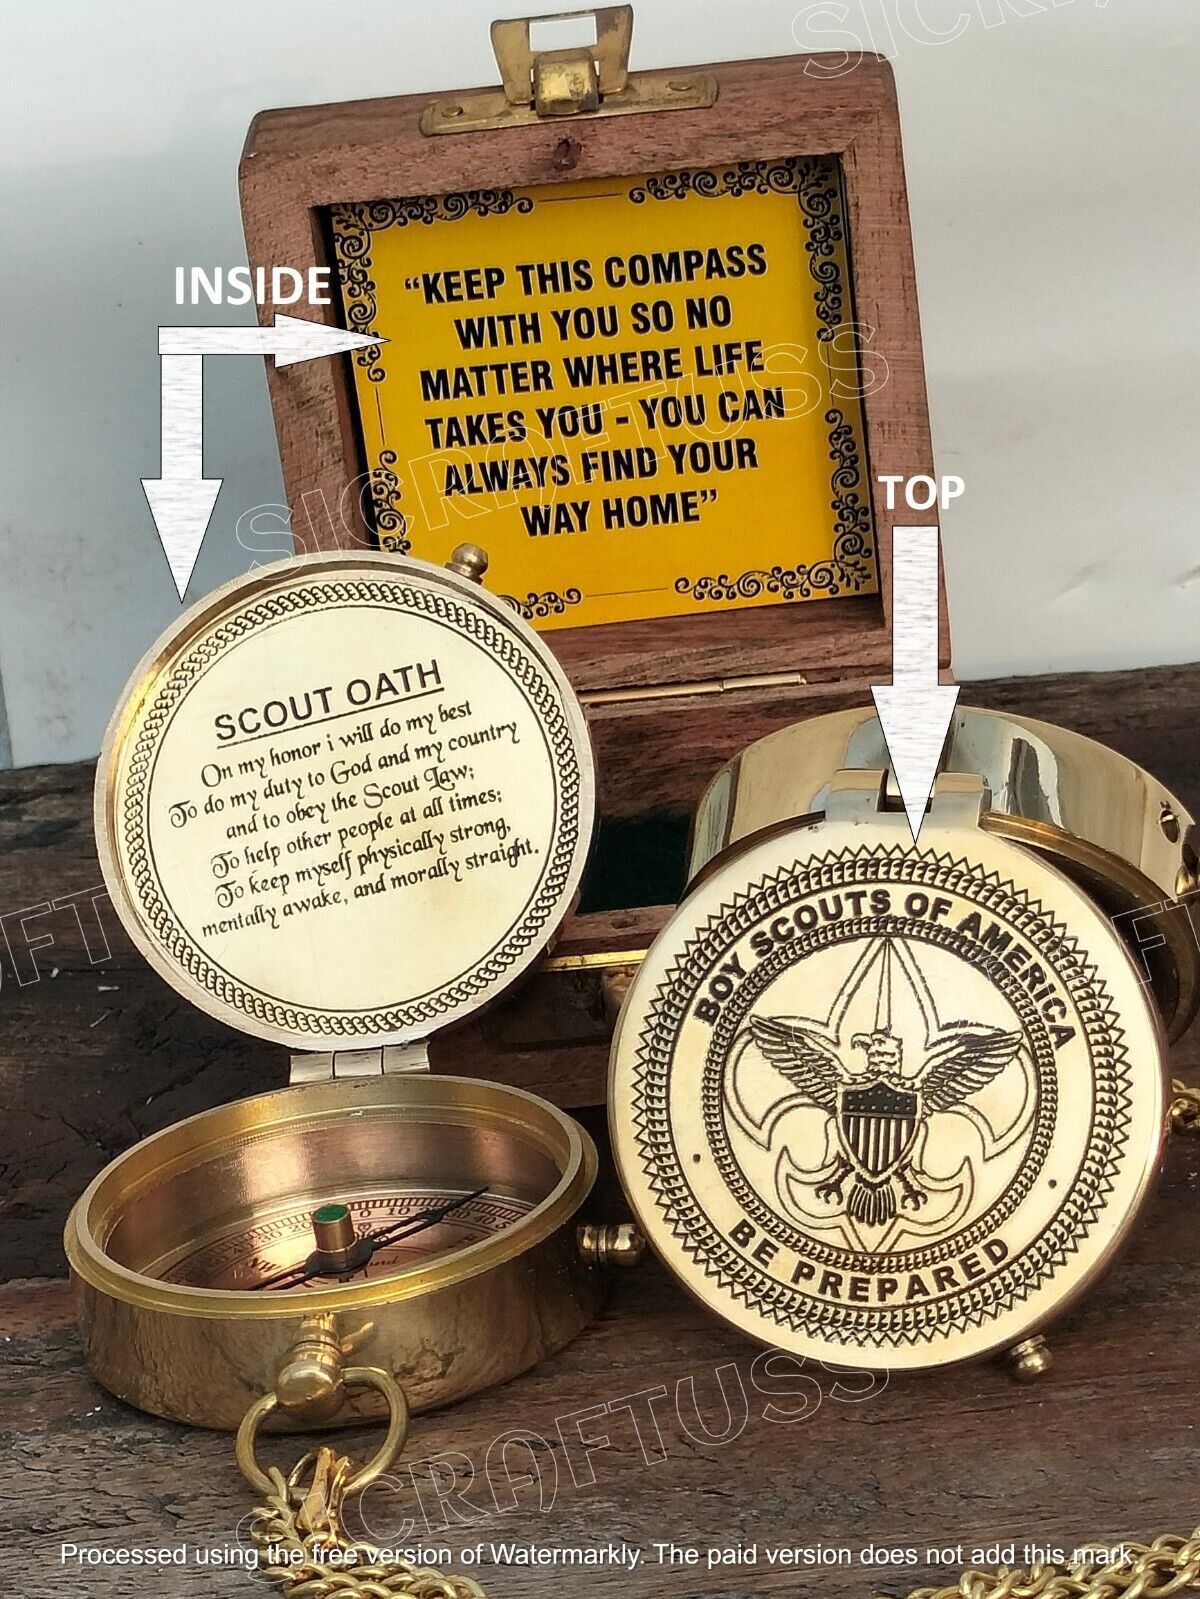 Boy Scout Of America(B.S.A) Brass Compass - Boy Scout Oath Compass With Box.